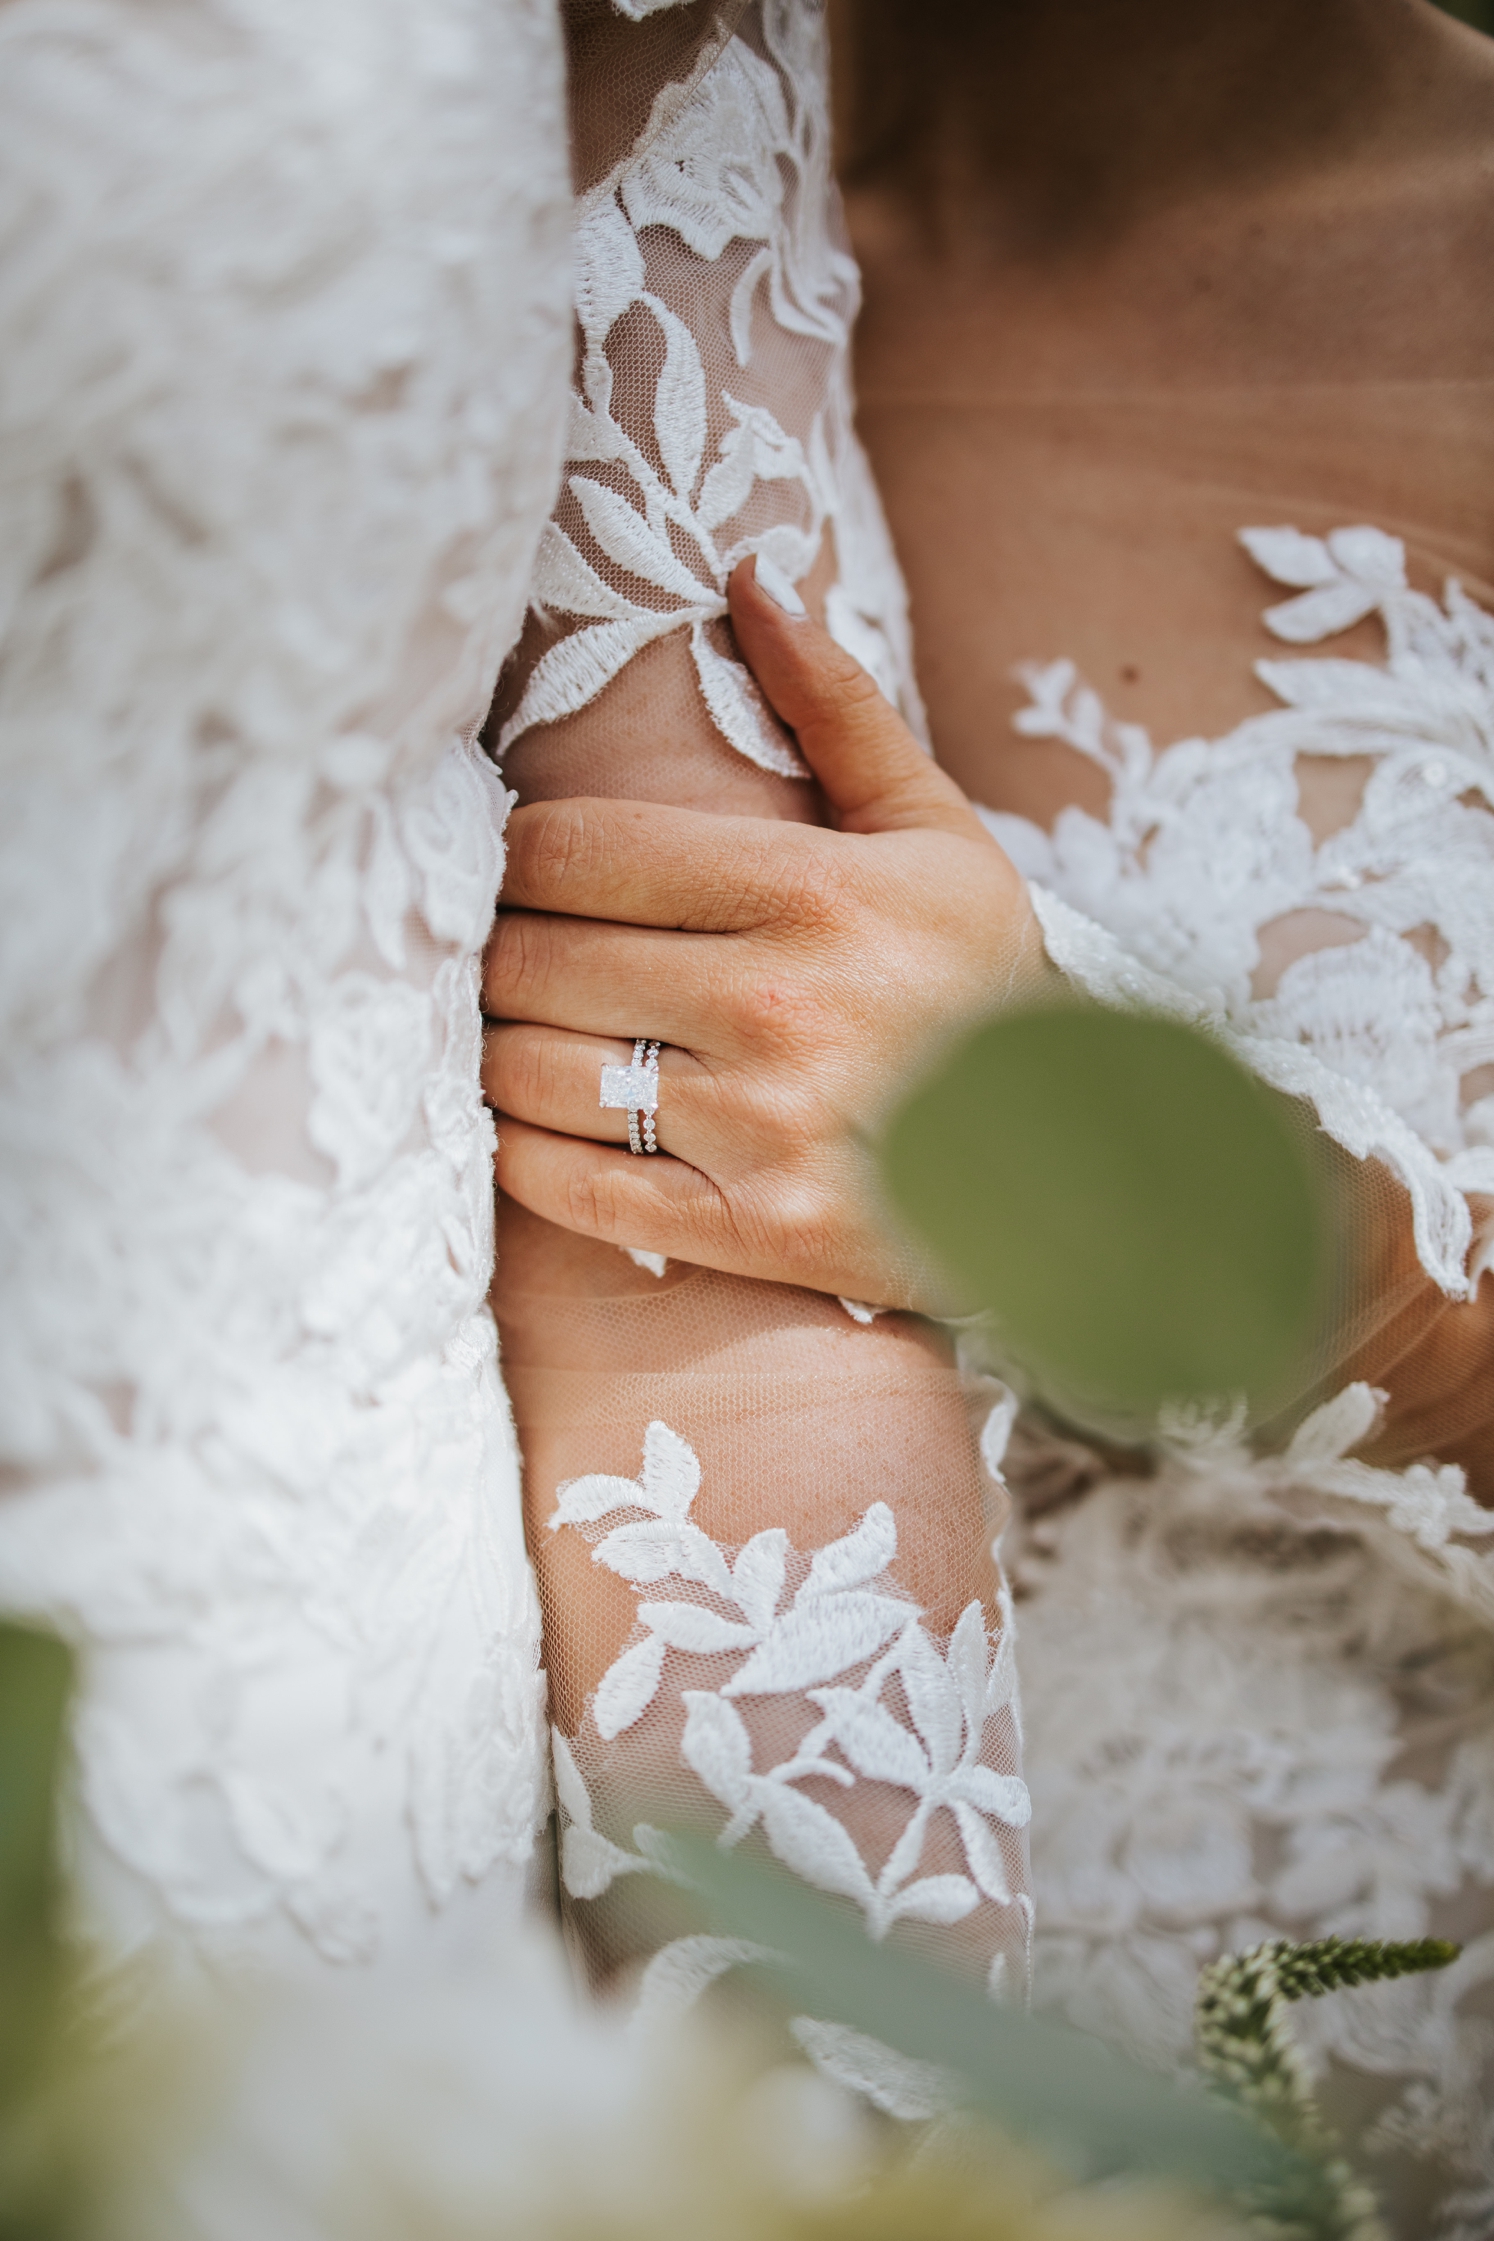 Woman's hand on partner's arm showing off wedding ring | McArthur Weddings and Events